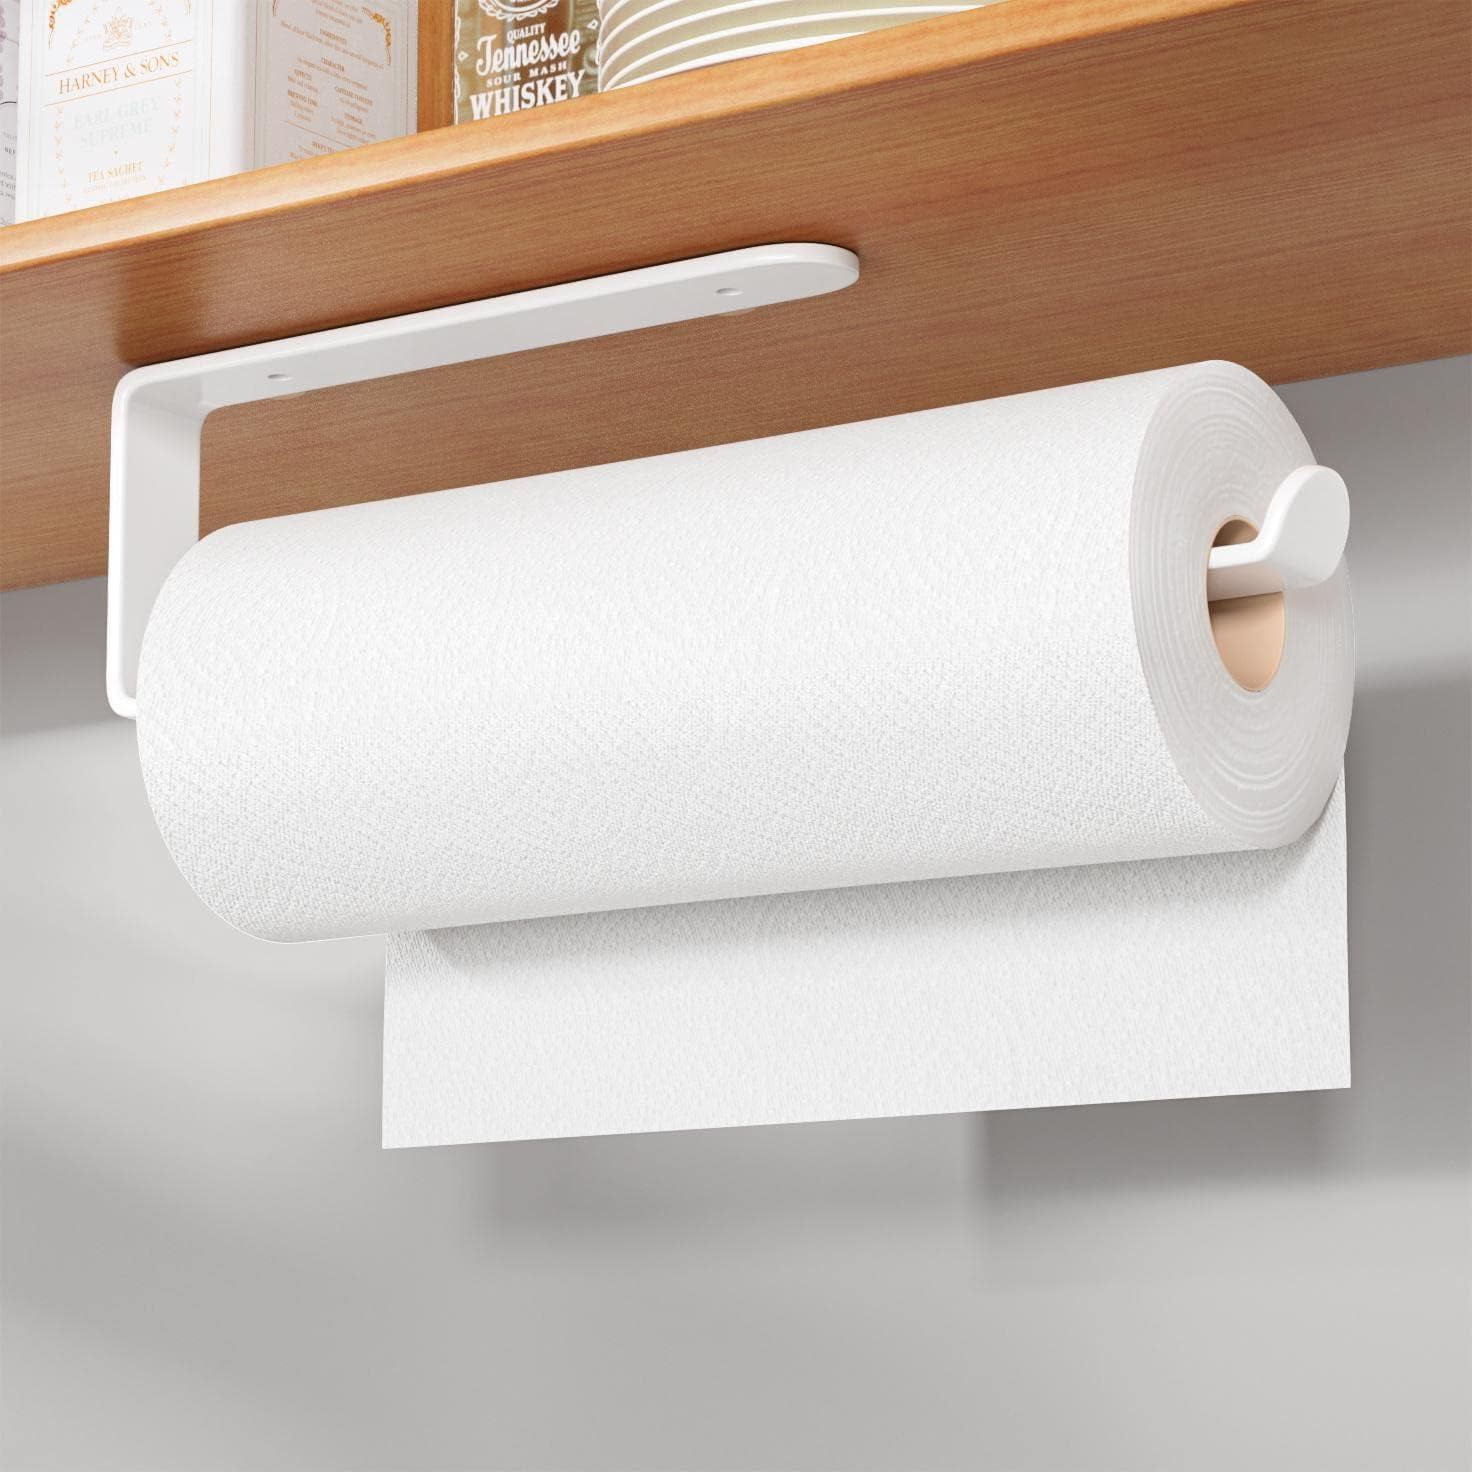 Taozun Self Adhesive Paper Towel Holder - Under Cabinet Paper Towel Rack  for Kitchen, SUS304 Brushed Stainless Steel (Sticky or Drilling)